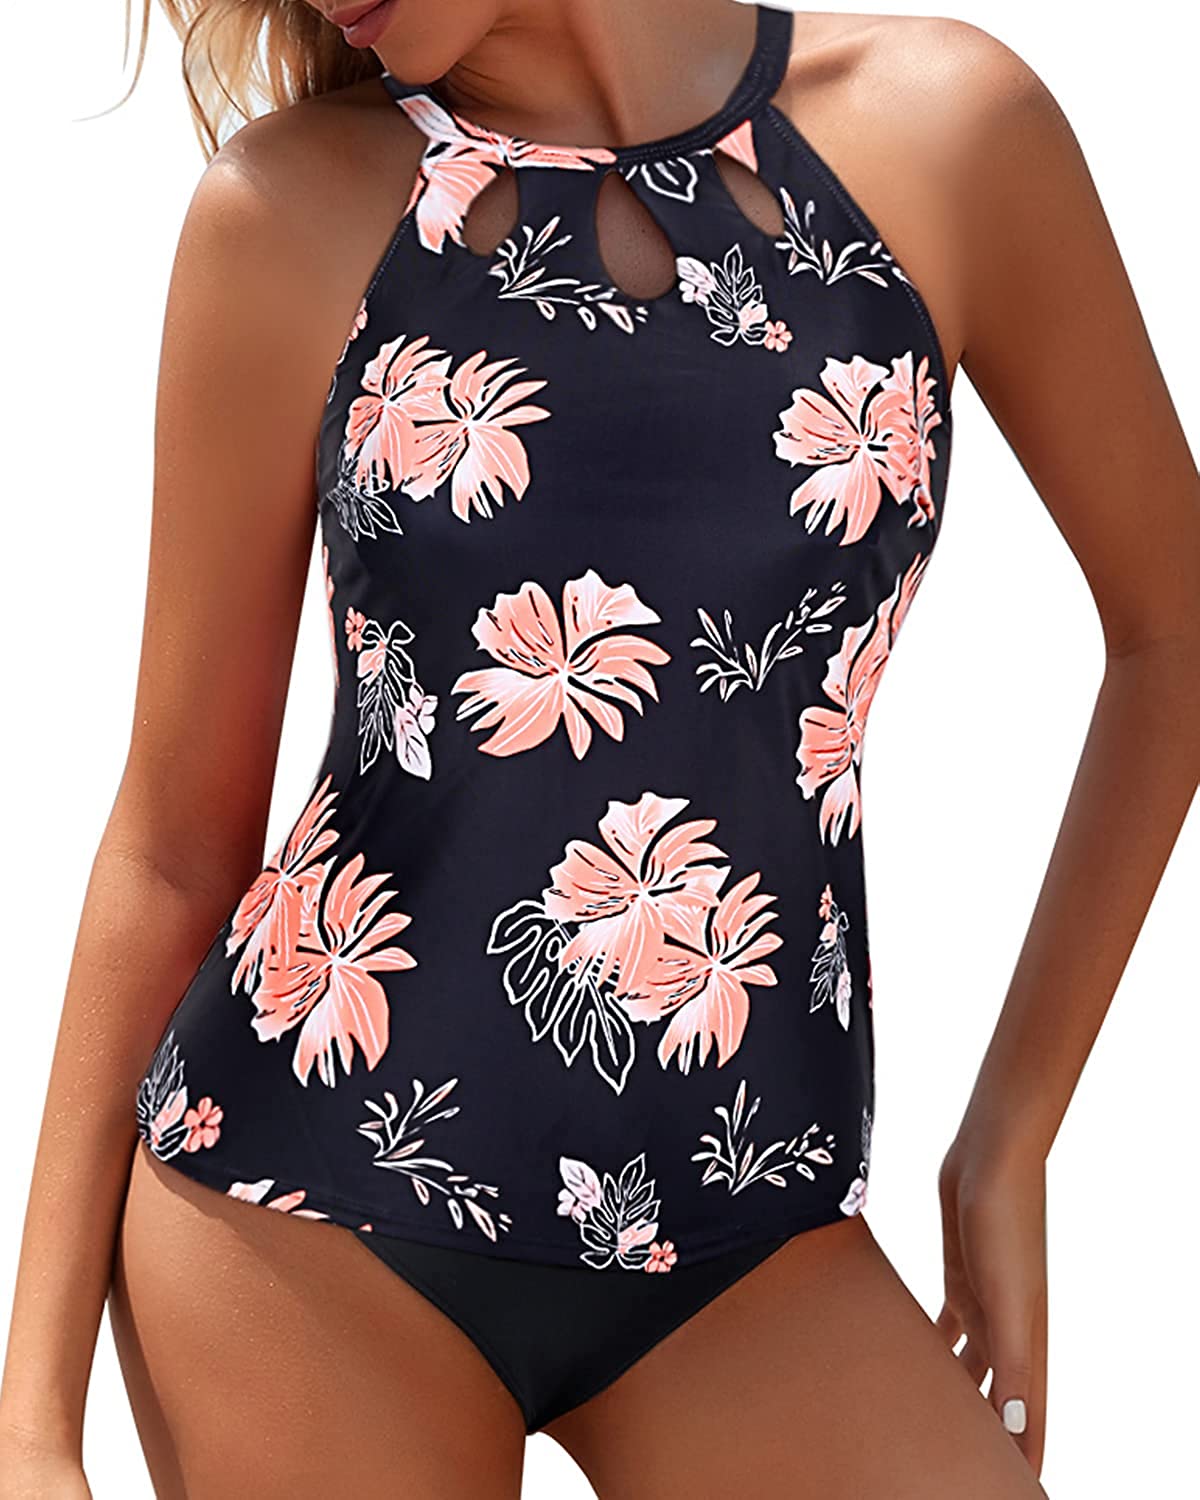 Yonique High Neck Tankini Swimsuits for Women Halter Bathing Suits Two Piece Floral Print Swimwear 